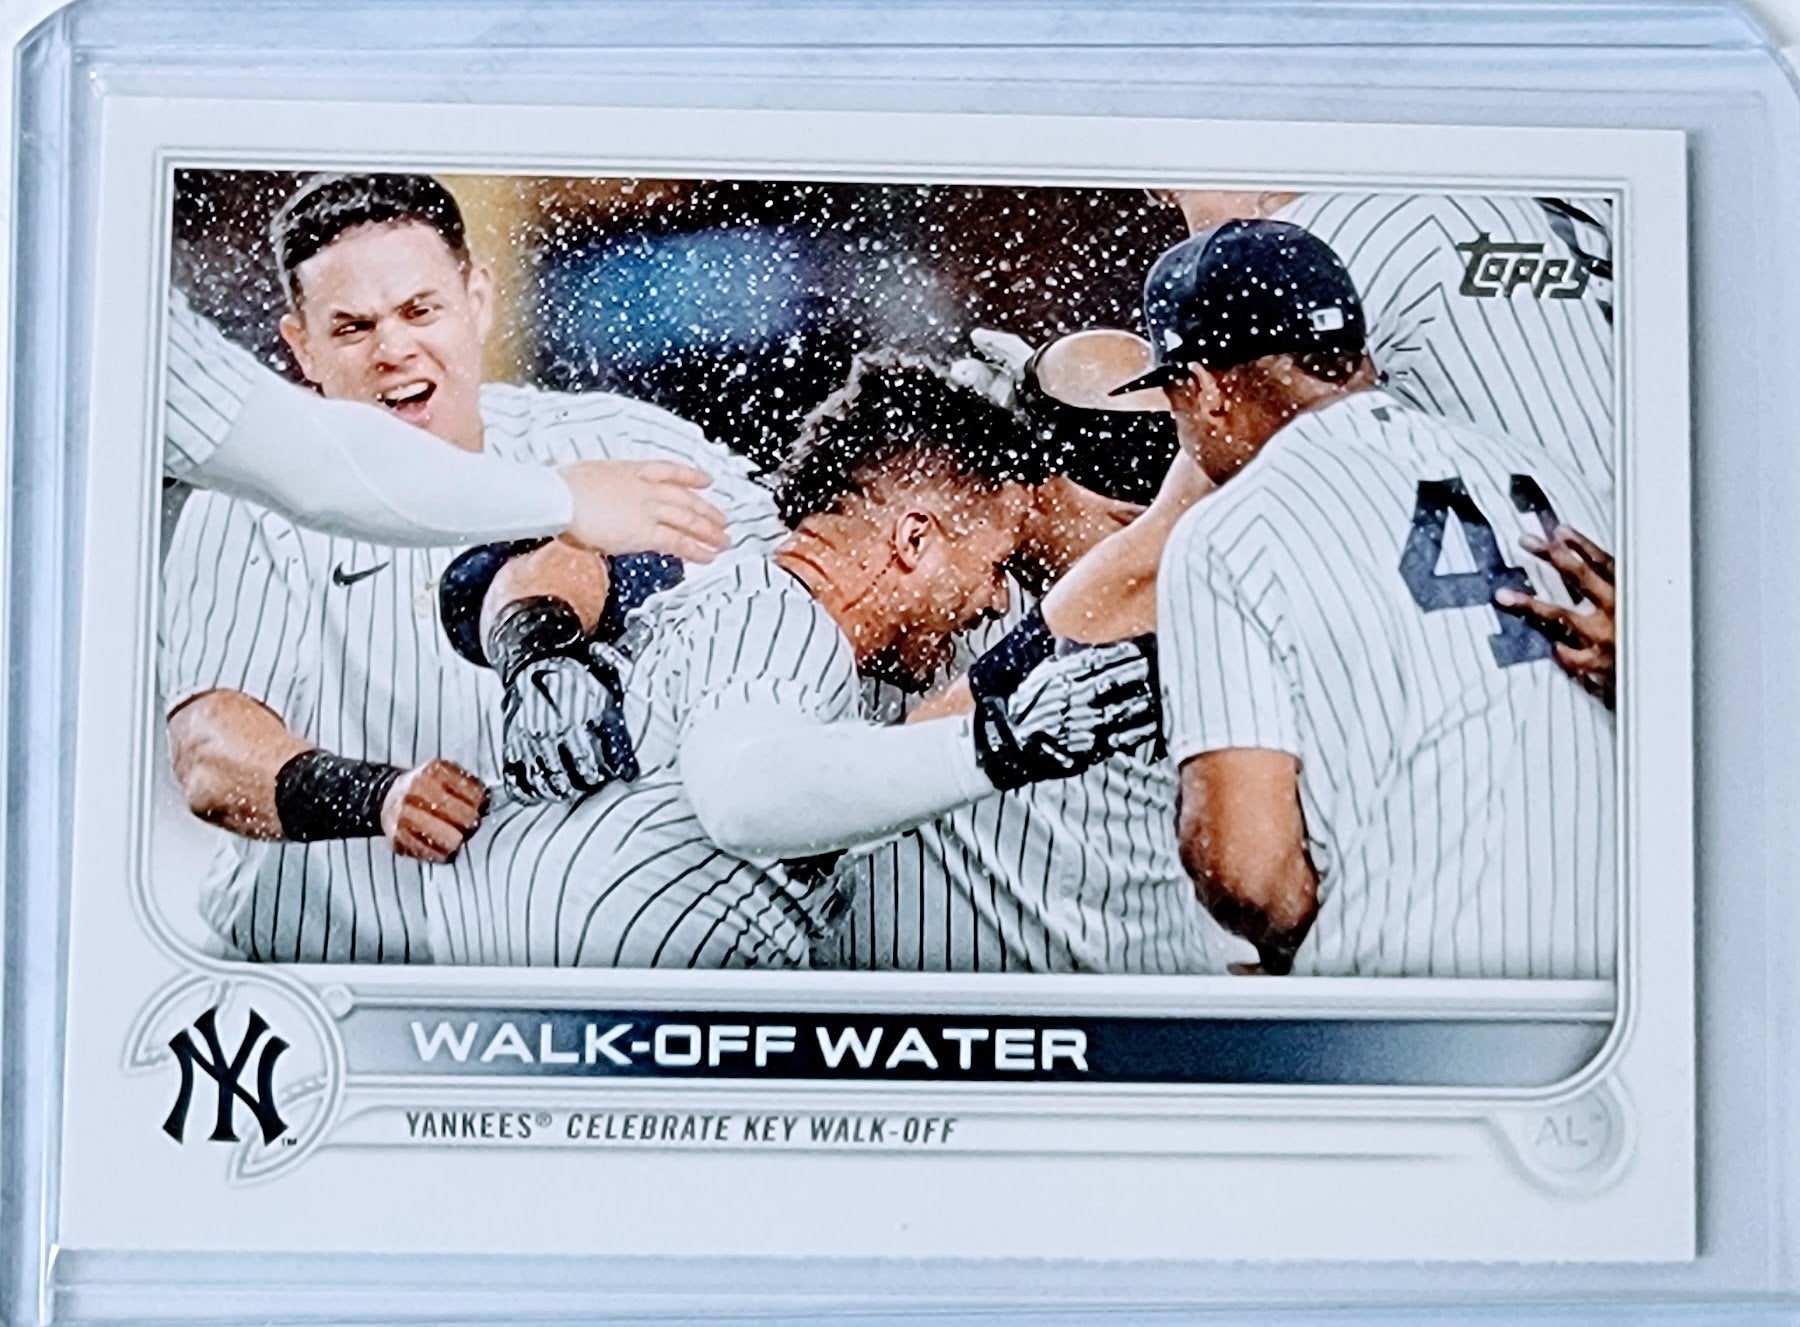 2022 Topps Walk Off Water Yankees Baseball Trading Card GRB1 simple Xclusive Collectibles   